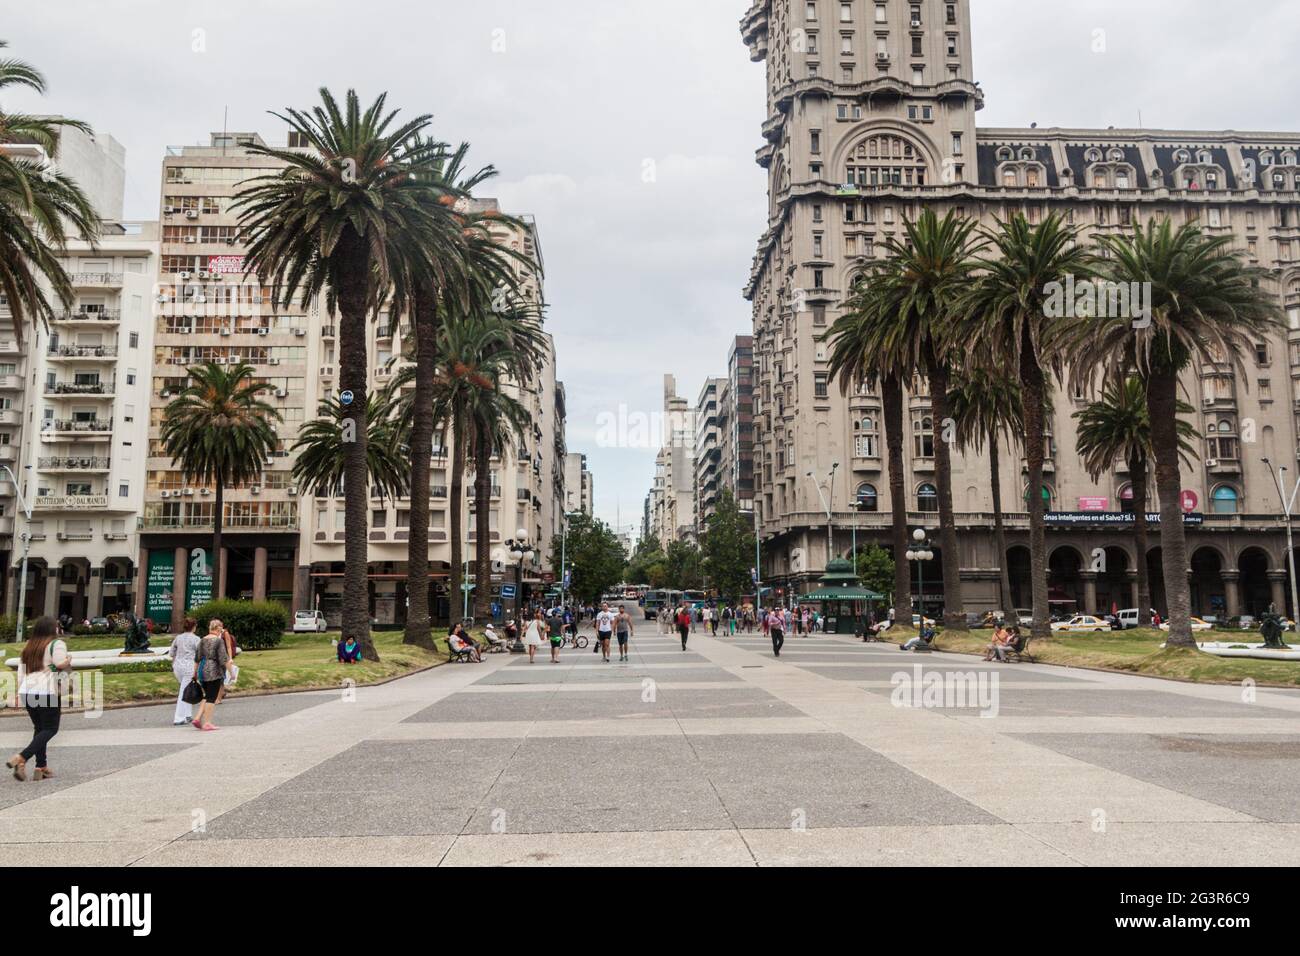 MONTEVIDEO, URUGUAY - FEB 18, 2015: View of Plaza Independecia square in the center of Montevideo. Stock Photo